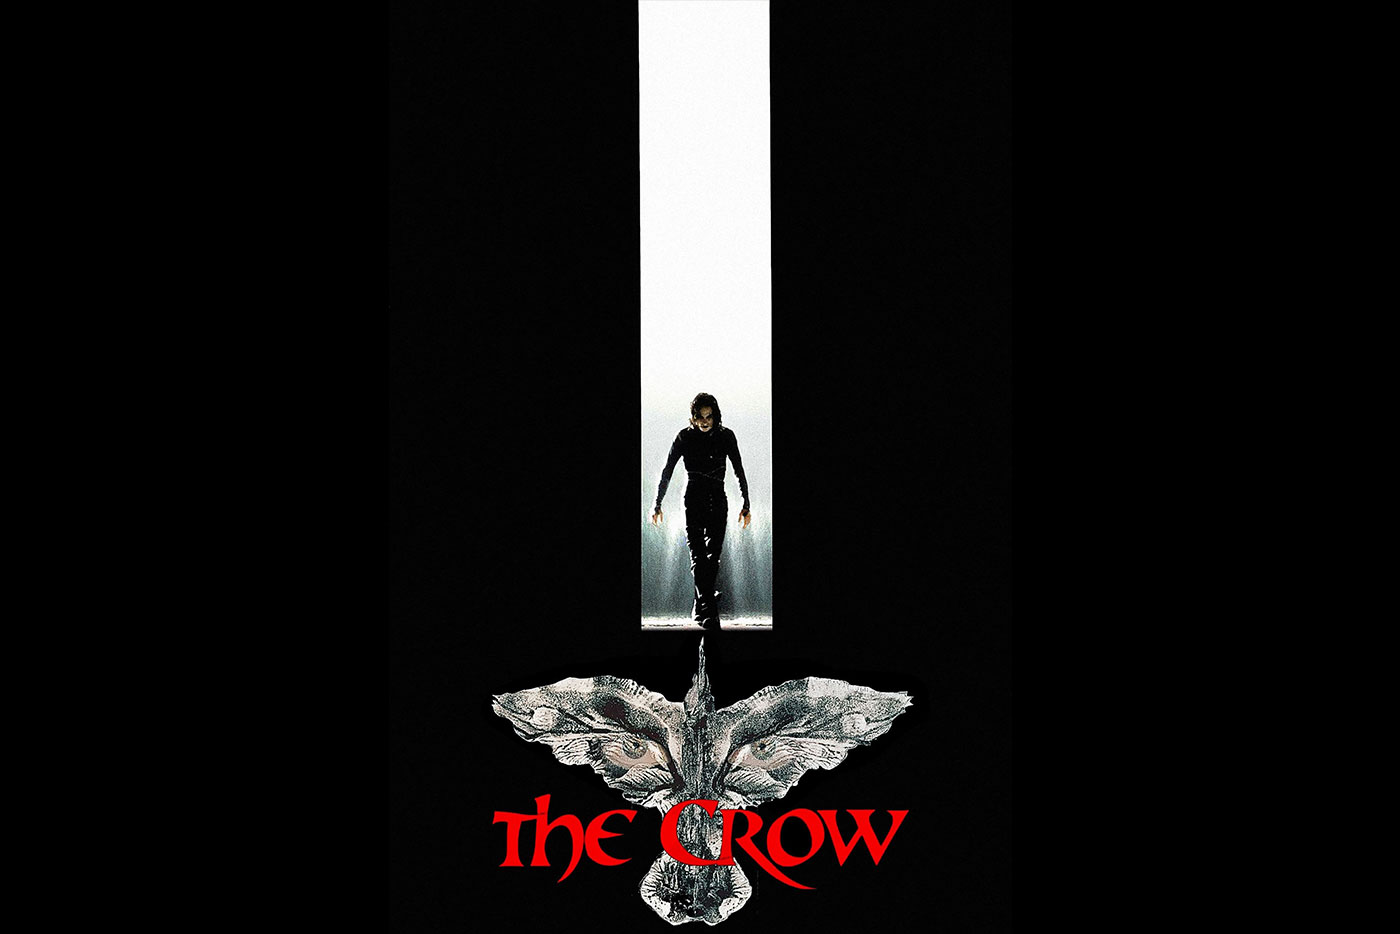 The Crow Franchise